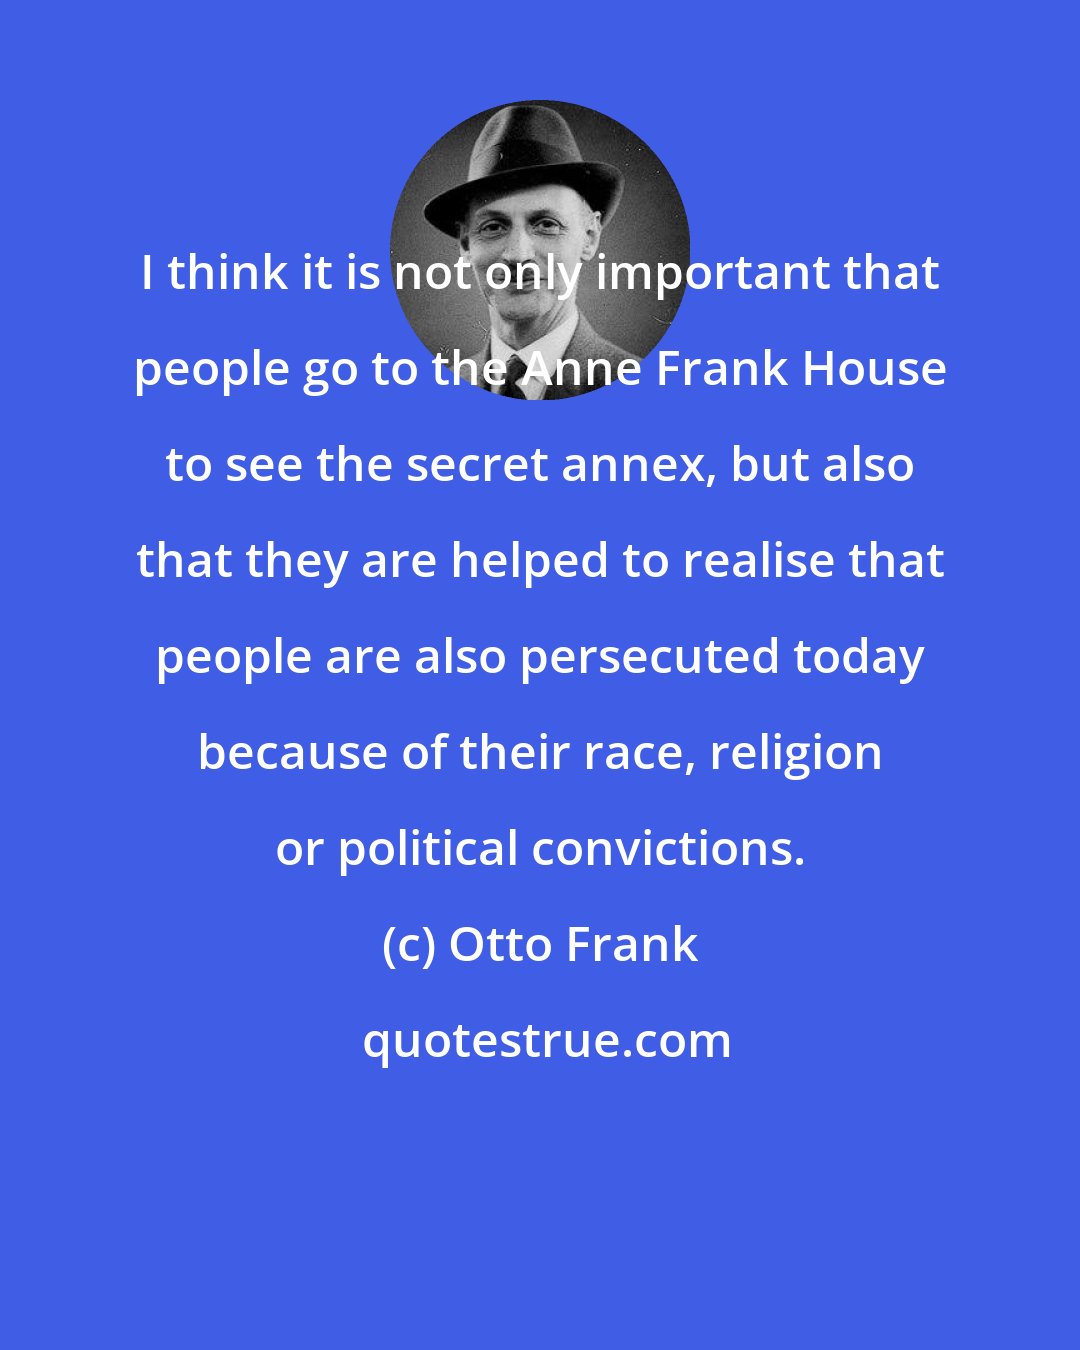 Otto Frank: I think it is not only important that people go to the Anne Frank House to see the secret annex, but also that they are helped to realise that people are also persecuted today because of their race, religion or political convictions.